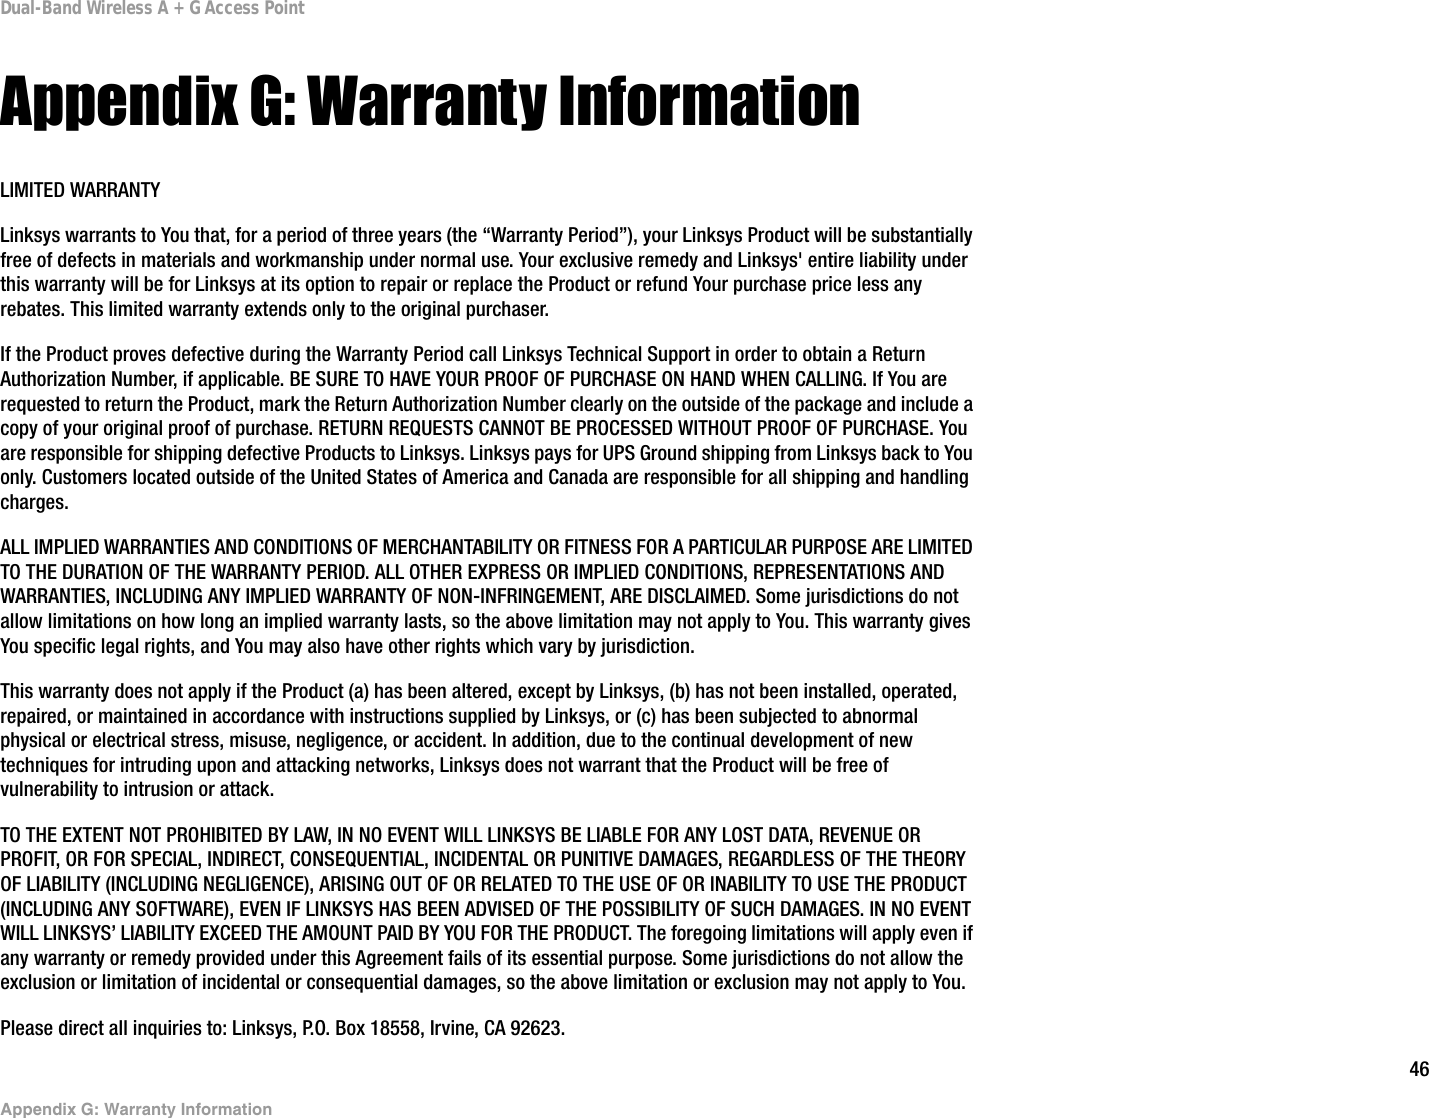 46Appendix G: Warranty InformationDual-Band Wireless A + G Access PointAppendix G: Warranty InformationLIMITED WARRANTYLinksys warrants to You that, for a period of three years (the “Warranty Period”), your Linksys Product will be substantially free of defects in materials and workmanship under normal use. Your exclusive remedy and Linksys&apos; entire liability under this warranty will be for Linksys at its option to repair or replace the Product or refund Your purchase price less any rebates. This limited warranty extends only to the original purchaser. If the Product proves defective during the Warranty Period call Linksys Technical Support in order to obtain a Return Authorization Number, if applicable. BE SURE TO HAVE YOUR PROOF OF PURCHASE ON HAND WHEN CALLING. If You are requested to return the Product, mark the Return Authorization Number clearly on the outside of the package and include a copy of your original proof of purchase. RETURN REQUESTS CANNOT BE PROCESSED WITHOUT PROOF OF PURCHASE. You are responsible for shipping defective Products to Linksys. Linksys pays for UPS Ground shipping from Linksys back to You only. Customers located outside of the United States of America and Canada are responsible for all shipping and handling charges. ALL IMPLIED WARRANTIES AND CONDITIONS OF MERCHANTABILITY OR FITNESS FOR A PARTICULAR PURPOSE ARE LIMITED TO THE DURATION OF THE WARRANTY PERIOD. ALL OTHER EXPRESS OR IMPLIED CONDITIONS, REPRESENTATIONS AND WARRANTIES, INCLUDING ANY IMPLIED WARRANTY OF NON-INFRINGEMENT, ARE DISCLAIMED. Some jurisdictions do not allow limitations on how long an implied warranty lasts, so the above limitation may not apply to You. This warranty gives You specific legal rights, and You may also have other rights which vary by jurisdiction.This warranty does not apply if the Product (a) has been altered, except by Linksys, (b) has not been installed, operated, repaired, or maintained in accordance with instructions supplied by Linksys, or (c) has been subjected to abnormal physical or electrical stress, misuse, negligence, or accident. In addition, due to the continual development of new techniques for intruding upon and attacking networks, Linksys does not warrant that the Product will be free of vulnerability to intrusion or attack.TO THE EXTENT NOT PROHIBITED BY LAW, IN NO EVENT WILL LINKSYS BE LIABLE FOR ANY LOST DATA, REVENUE OR PROFIT, OR FOR SPECIAL, INDIRECT, CONSEQUENTIAL, INCIDENTAL OR PUNITIVE DAMAGES, REGARDLESS OF THE THEORY OF LIABILITY (INCLUDING NEGLIGENCE), ARISING OUT OF OR RELATED TO THE USE OF OR INABILITY TO USE THE PRODUCT (INCLUDING ANY SOFTWARE), EVEN IF LINKSYS HAS BEEN ADVISED OF THE POSSIBILITY OF SUCH DAMAGES. IN NO EVENT WILL LINKSYS’ LIABILITY EXCEED THE AMOUNT PAID BY YOU FOR THE PRODUCT. The foregoing limitations will apply even if any warranty or remedy provided under this Agreement fails of its essential purpose. Some jurisdictions do not allow the exclusion or limitation of incidental or consequential damages, so the above limitation or exclusion may not apply to You.Please direct all inquiries to: Linksys, P.O. Box 18558, Irvine, CA 92623.